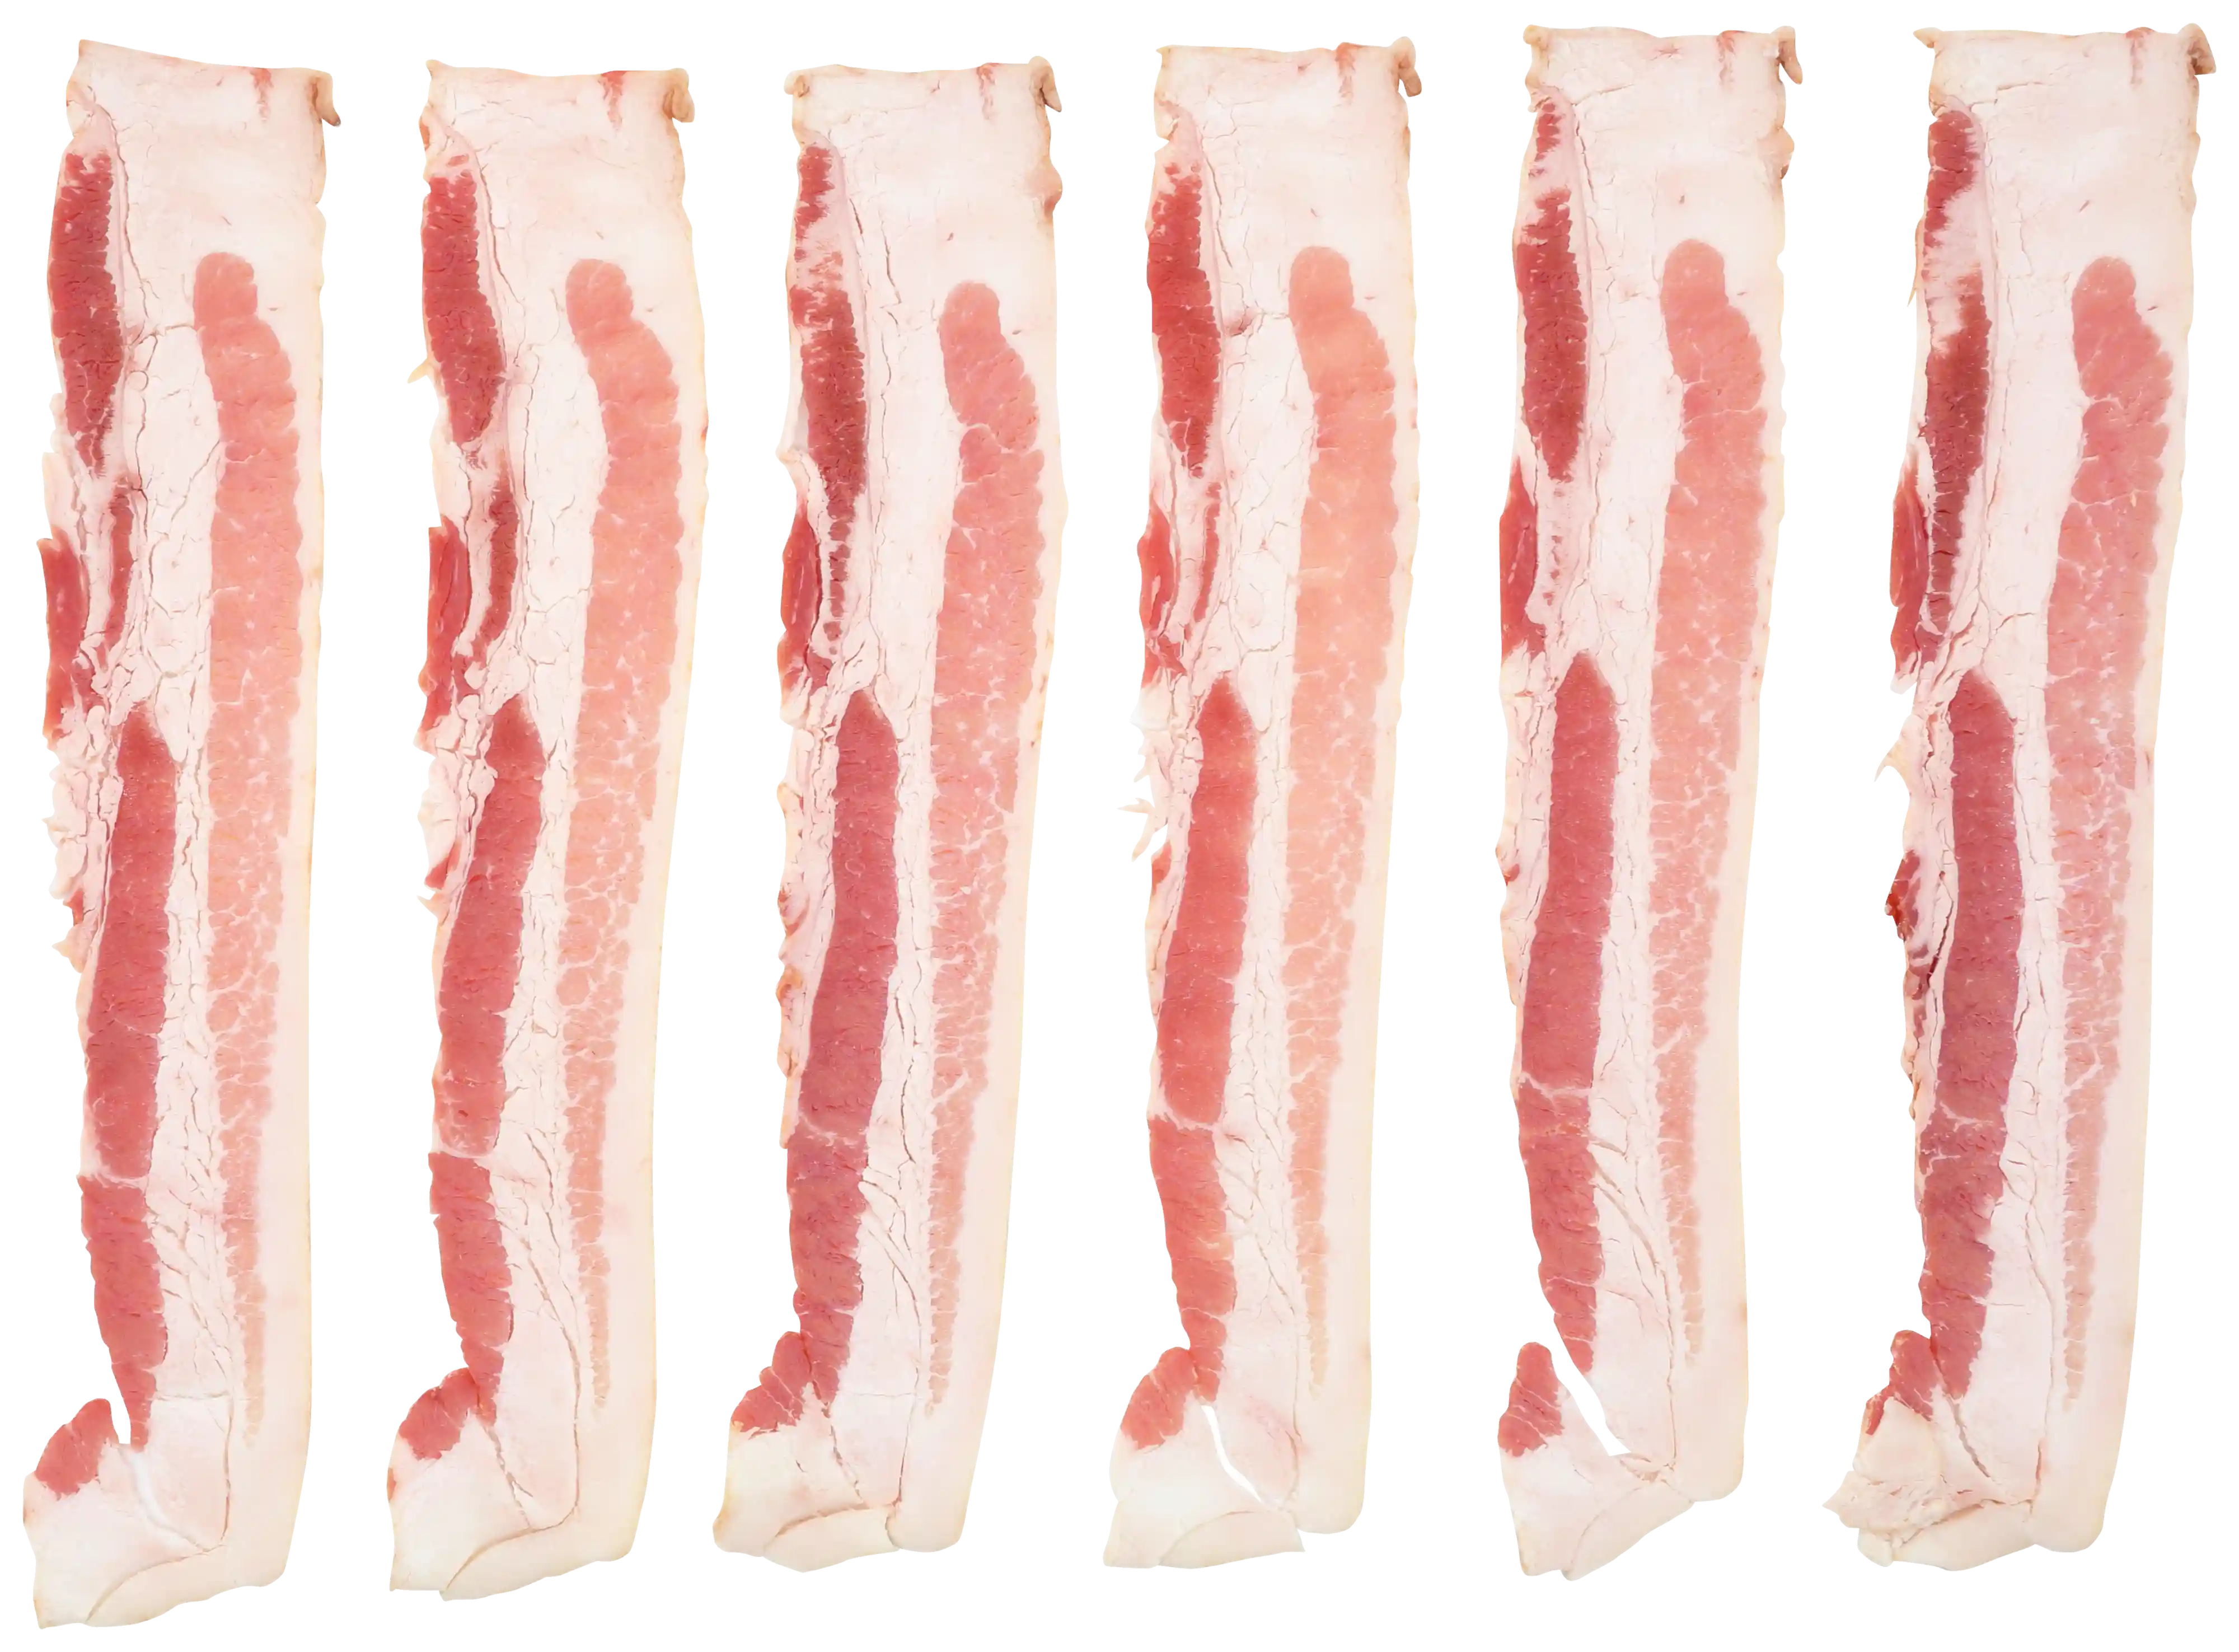 Wright® Brand Naturally Hickory Smoked Regular Sliced Bacon, Flat-Pack®, 15 Lbs, 14-18 Slices per Pound, Frozen_image_21